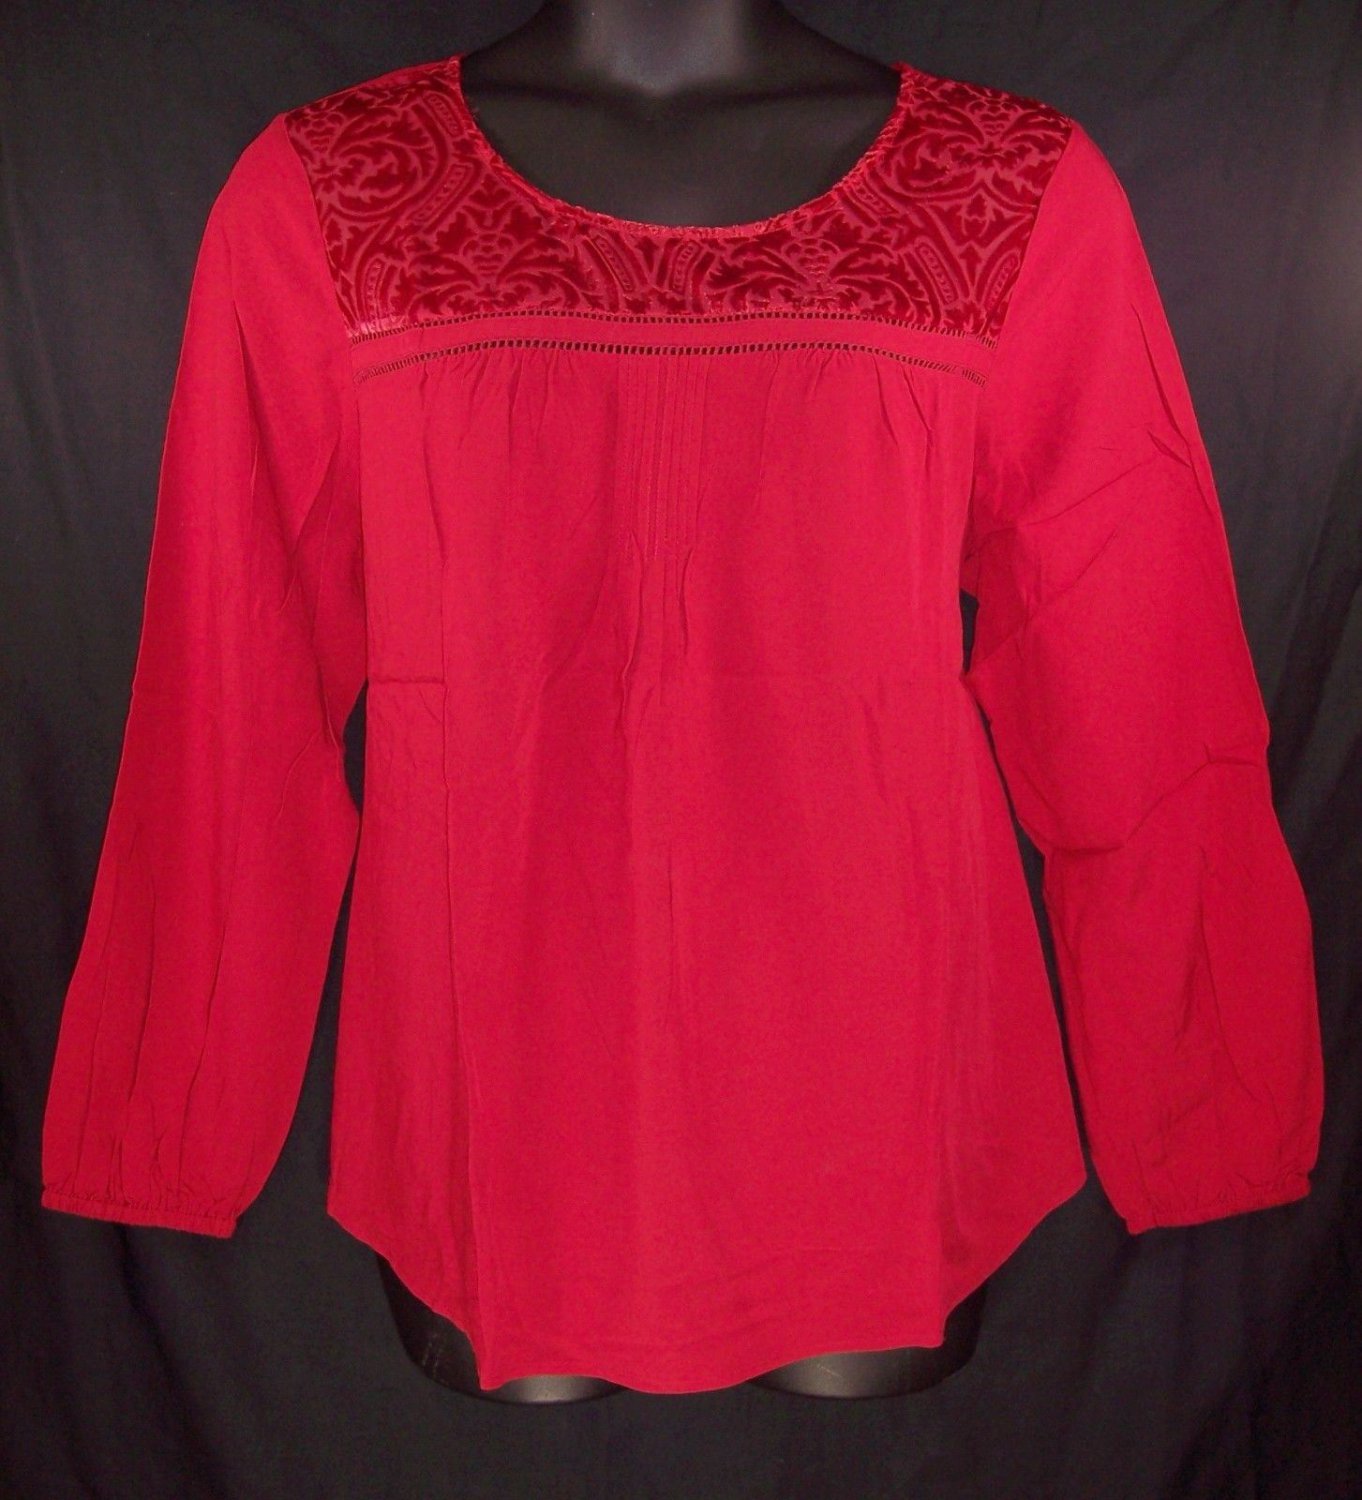 St. John's Bay 2X Red Eyelet Stitching Velour Detail Long Sleeve Top-New